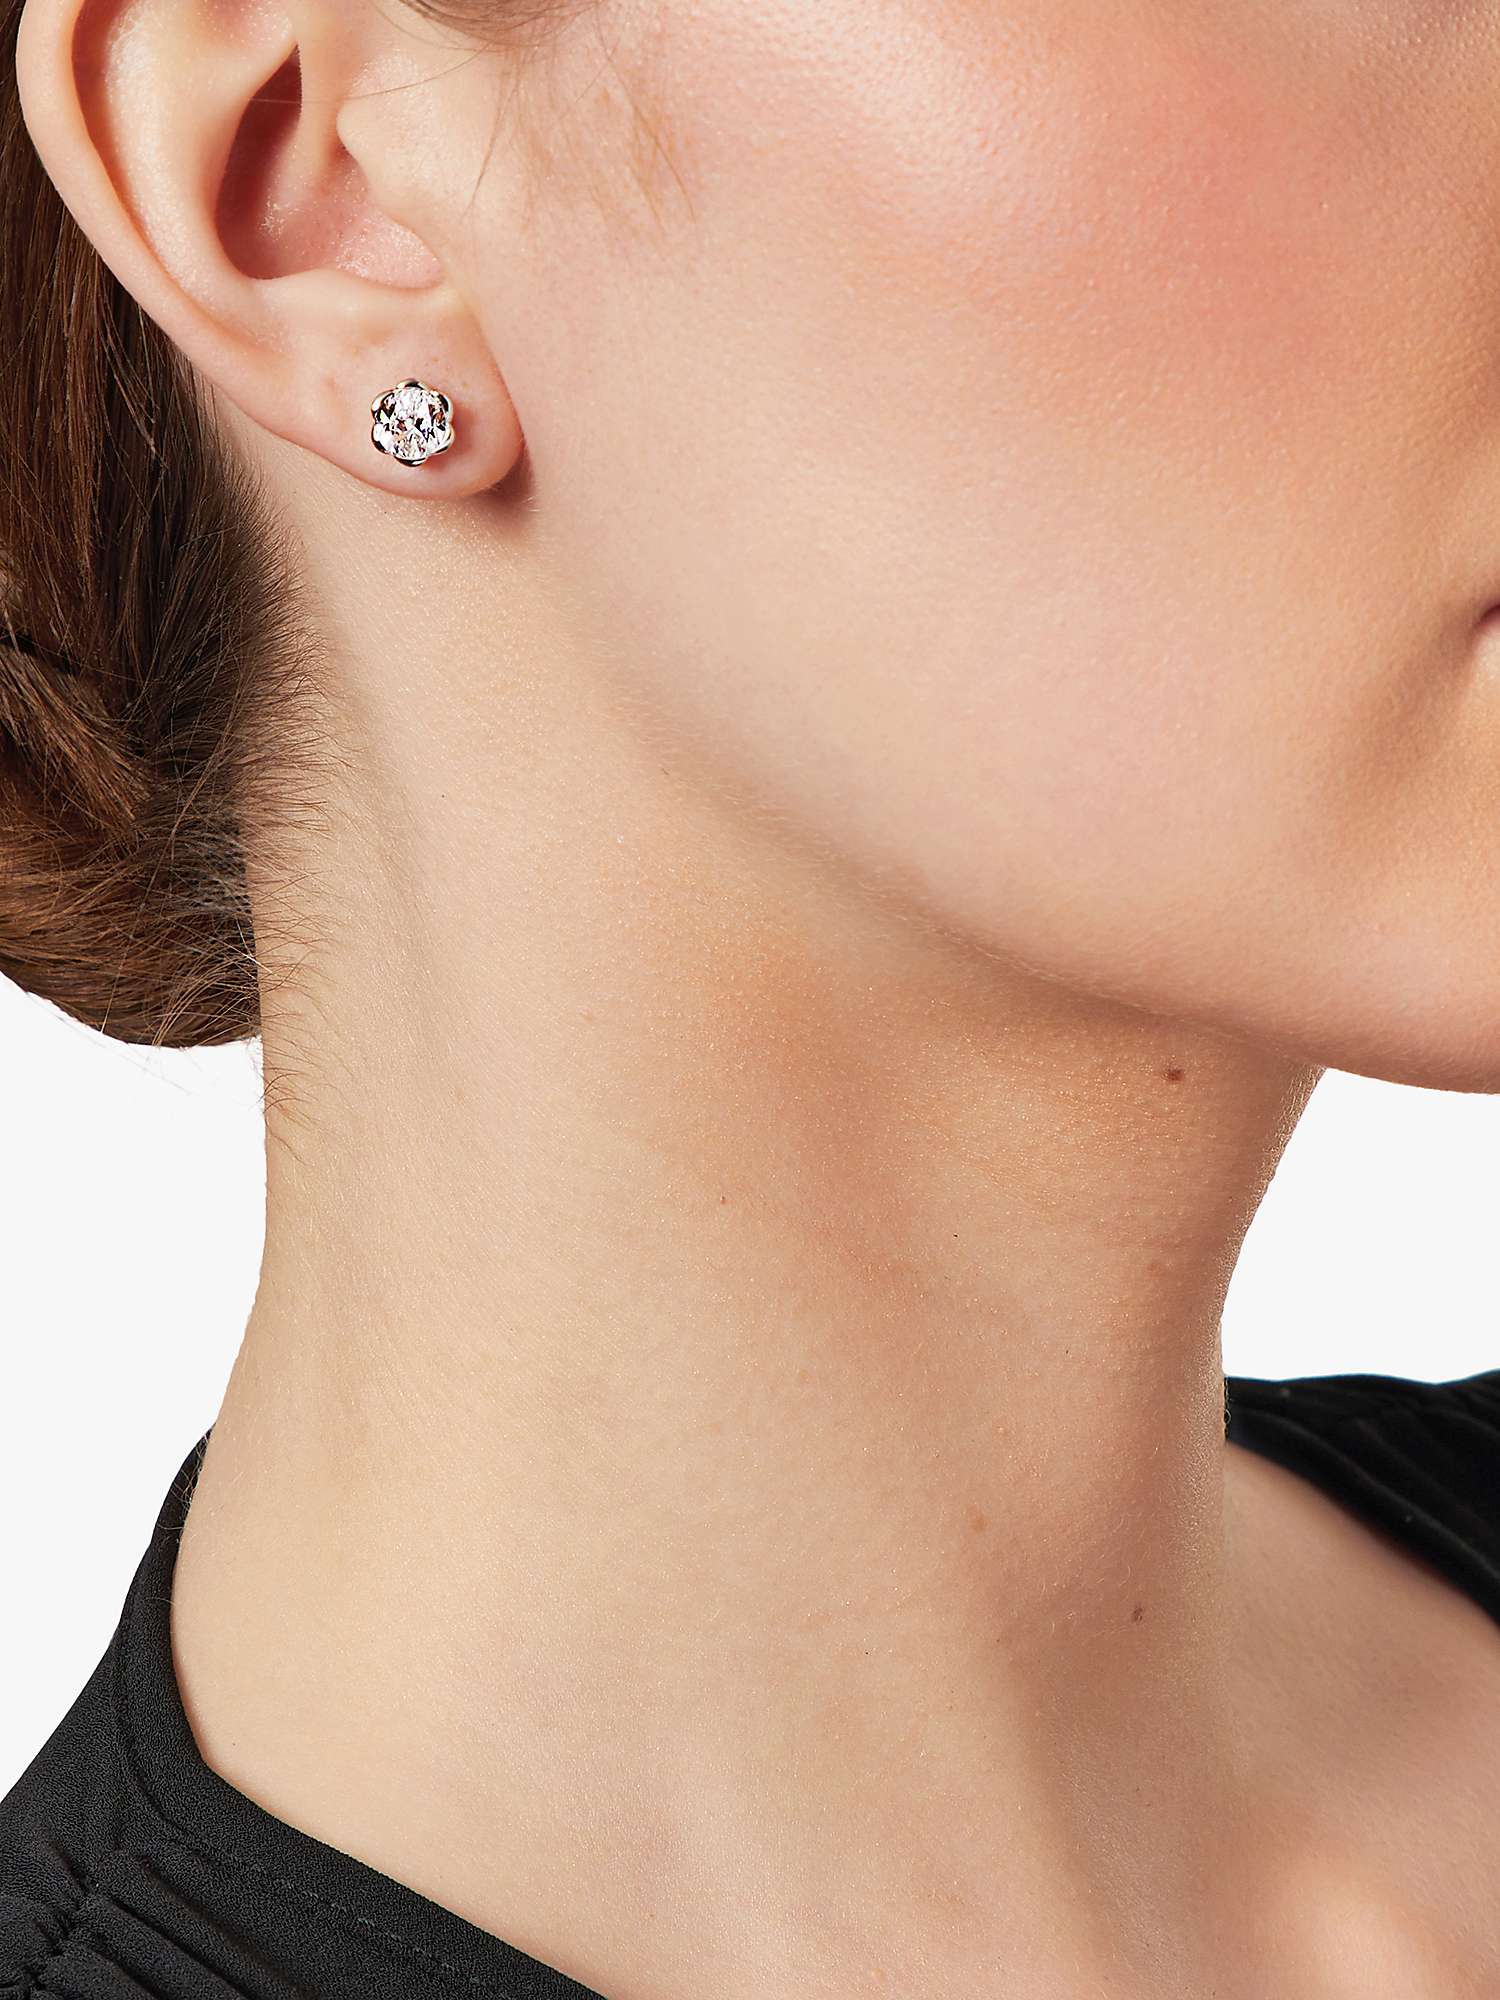 Buy Jools by Jenny Brown Cubic Zirconia Scalloped Stud Earrings, Silver Online at johnlewis.com